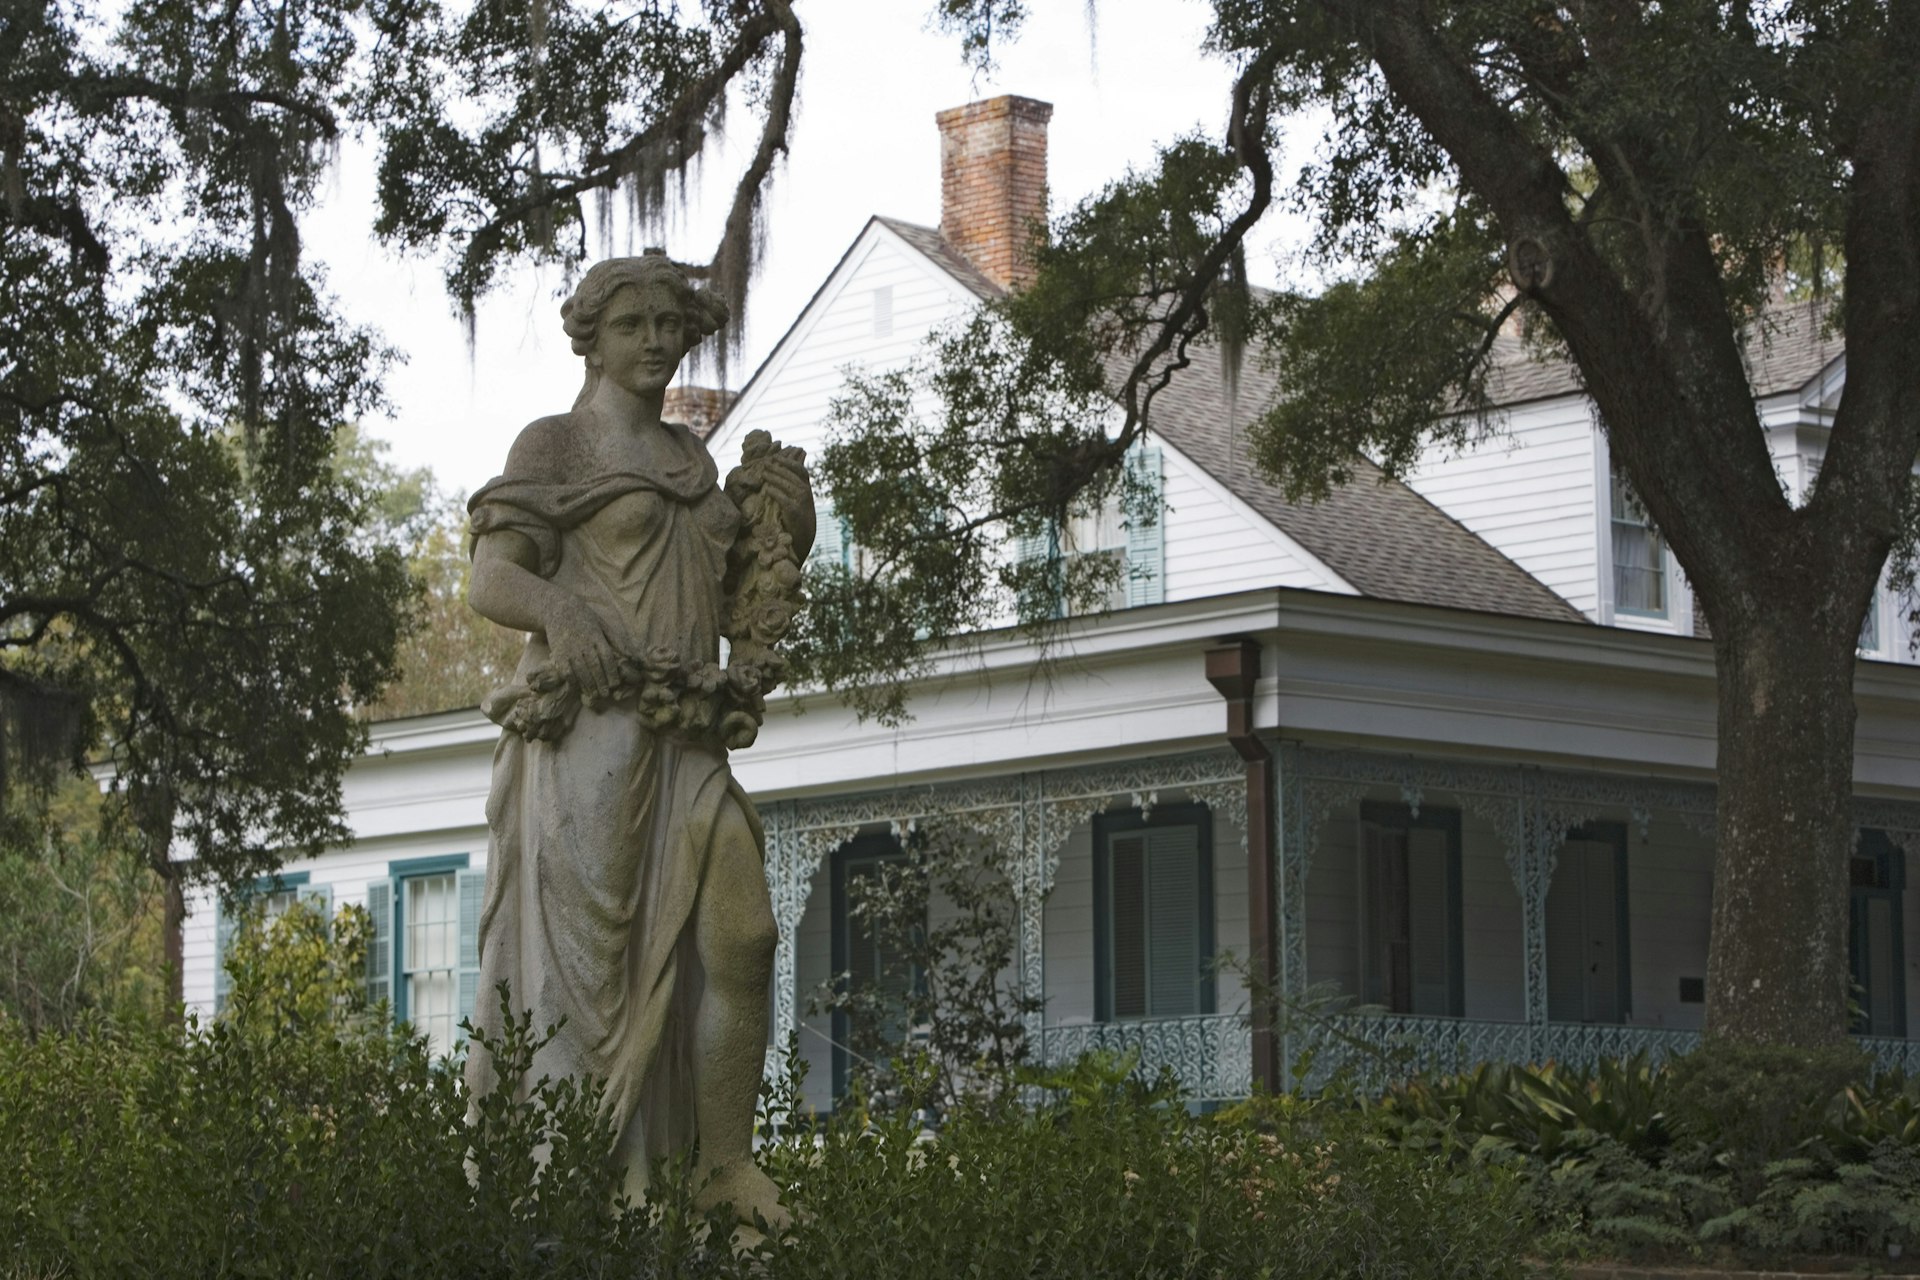 A statue of a woman holding flowers is positioned in front of a white house with light blue shutters on Myrtles Plantation in Louisiana 